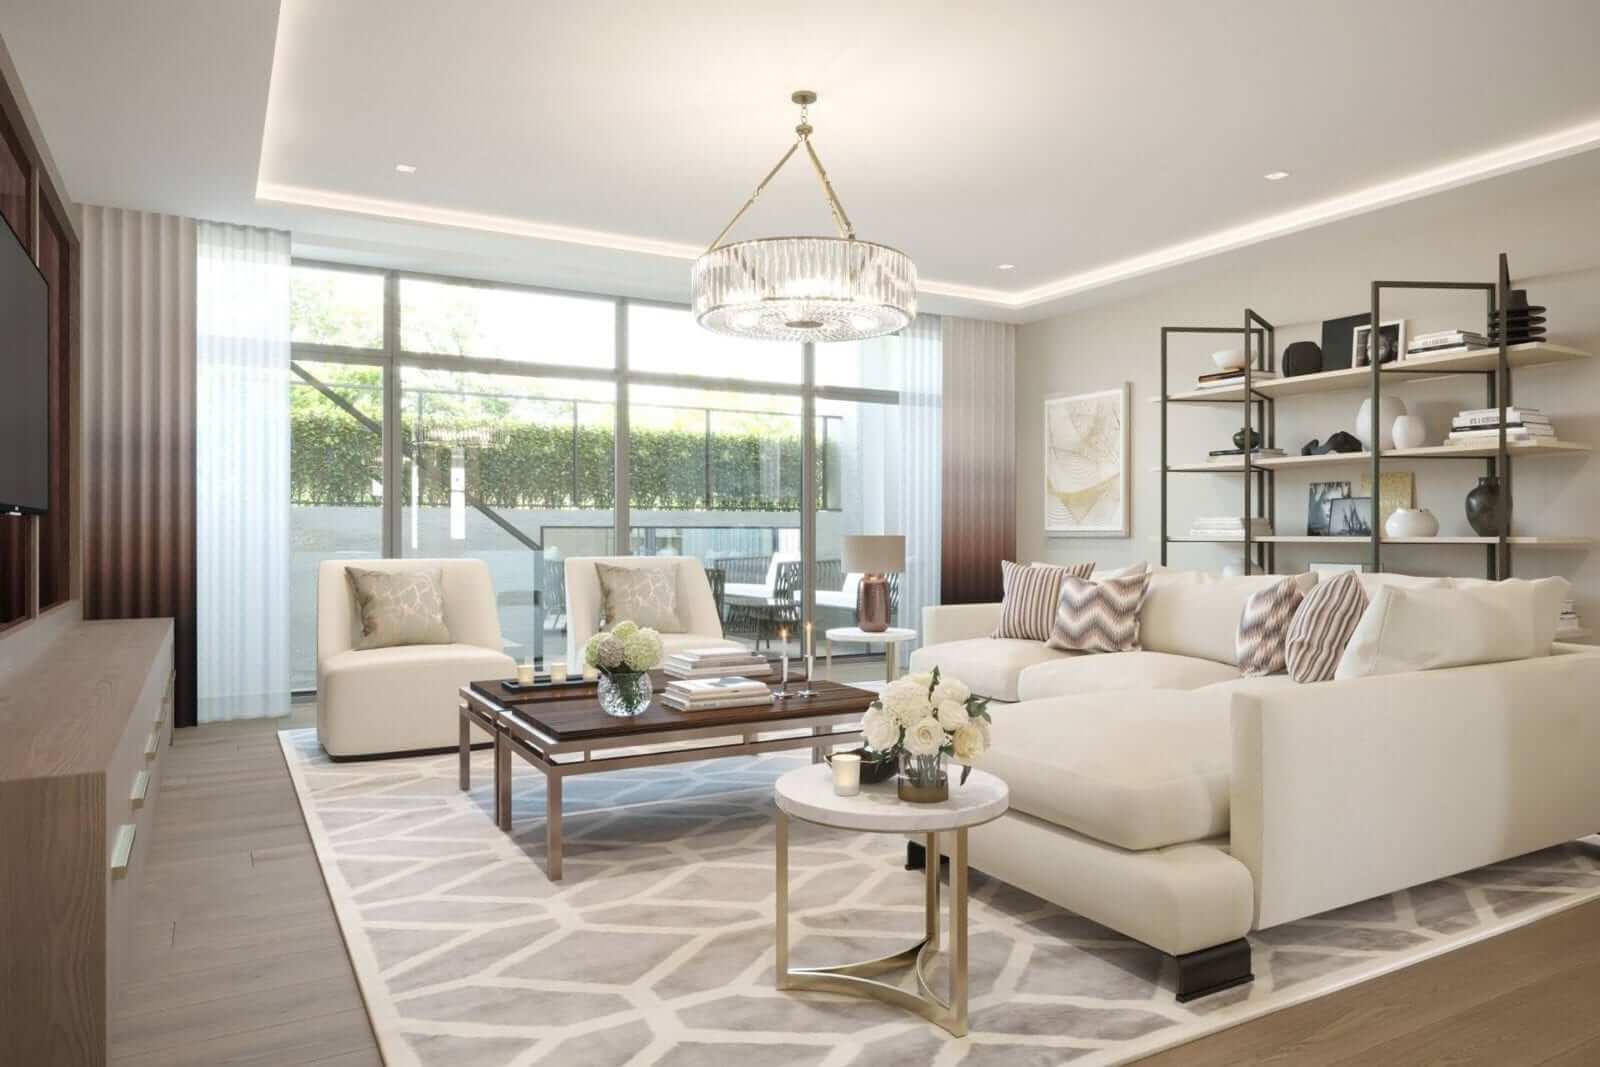 Living room design by Sara Cosgrove Interior Design at the Duplex Townhouses for sale at Lansdowne Place in Ballsbridge